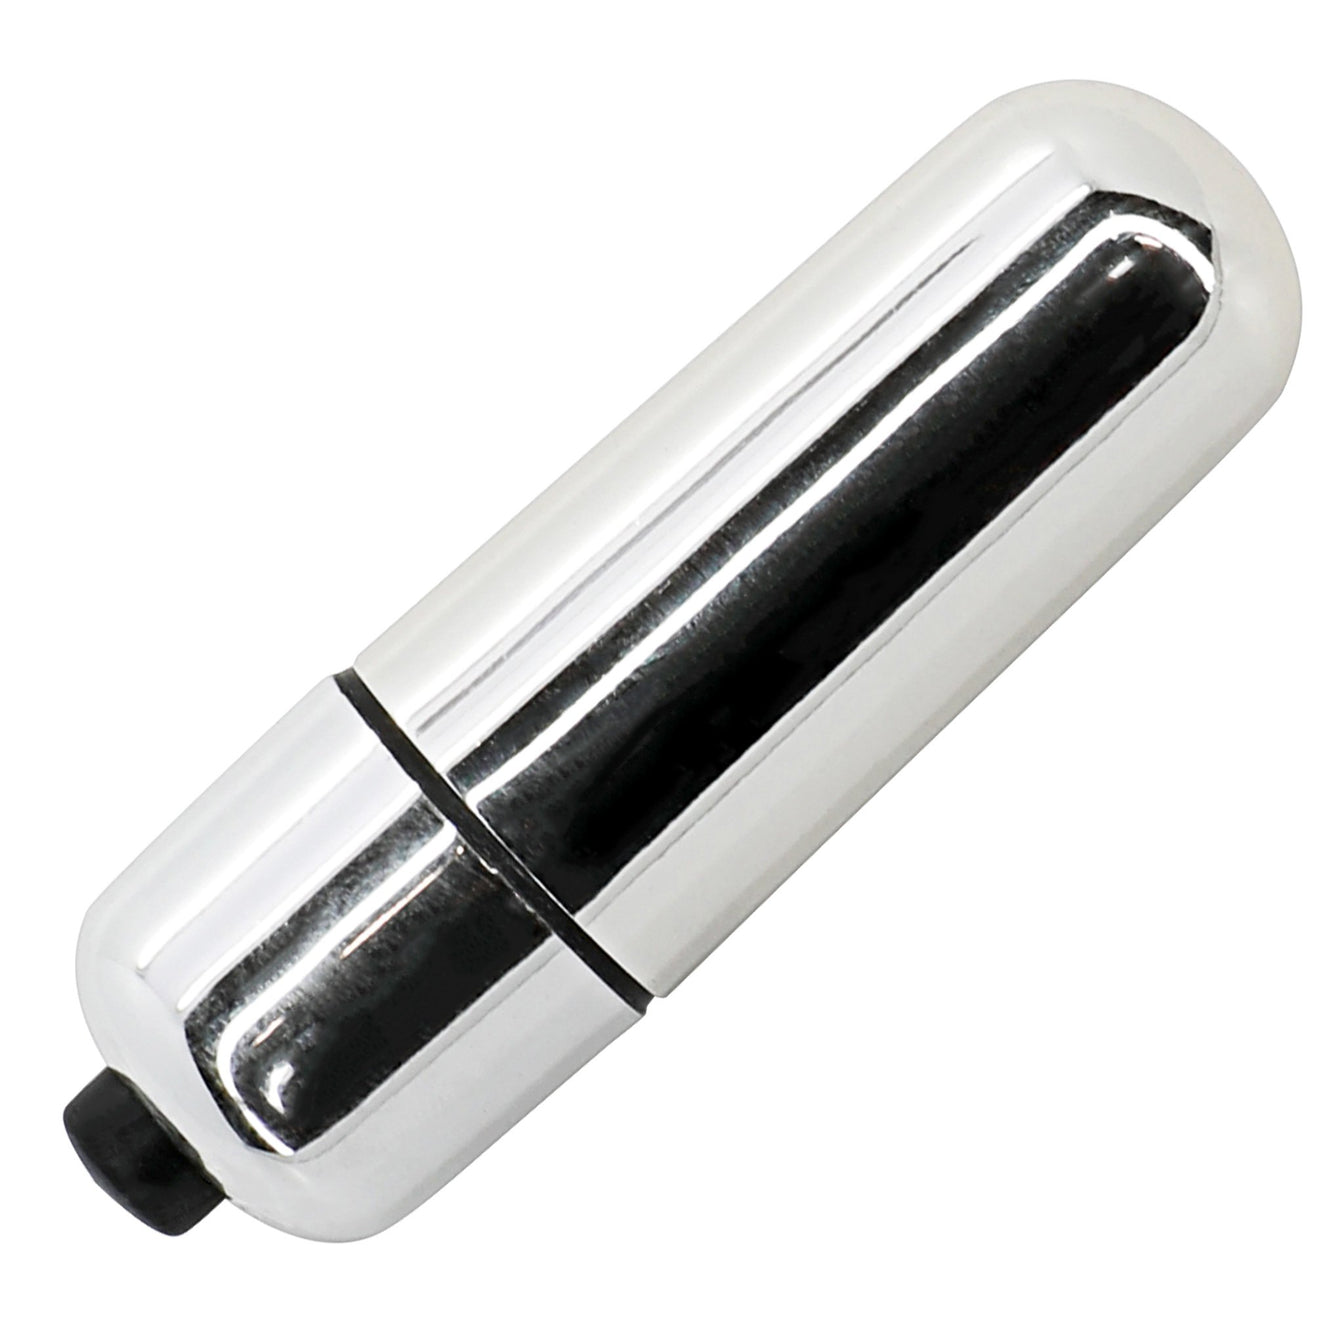 Image of silver bullet vibrator